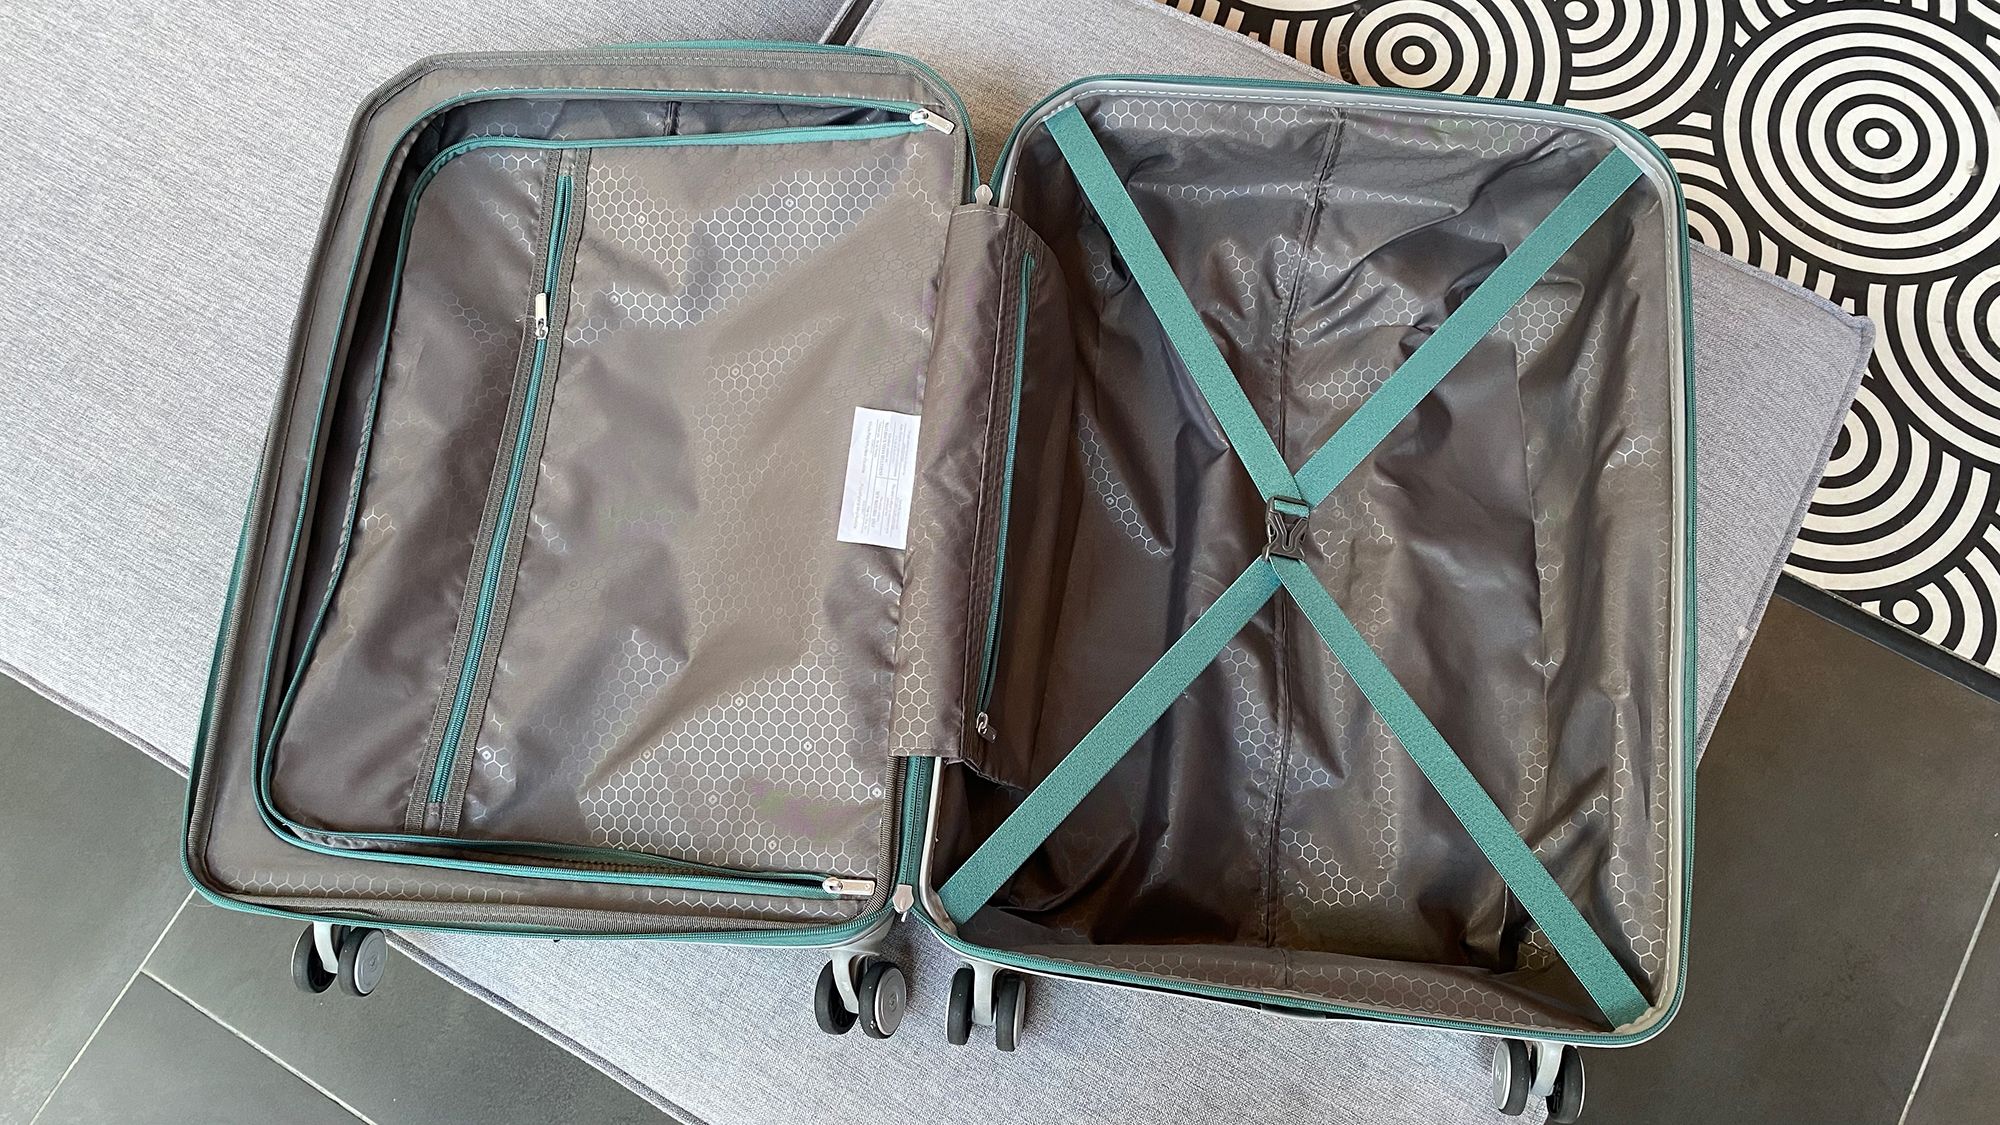 Check-in Size Luggage, High-end Check-In Suitcases